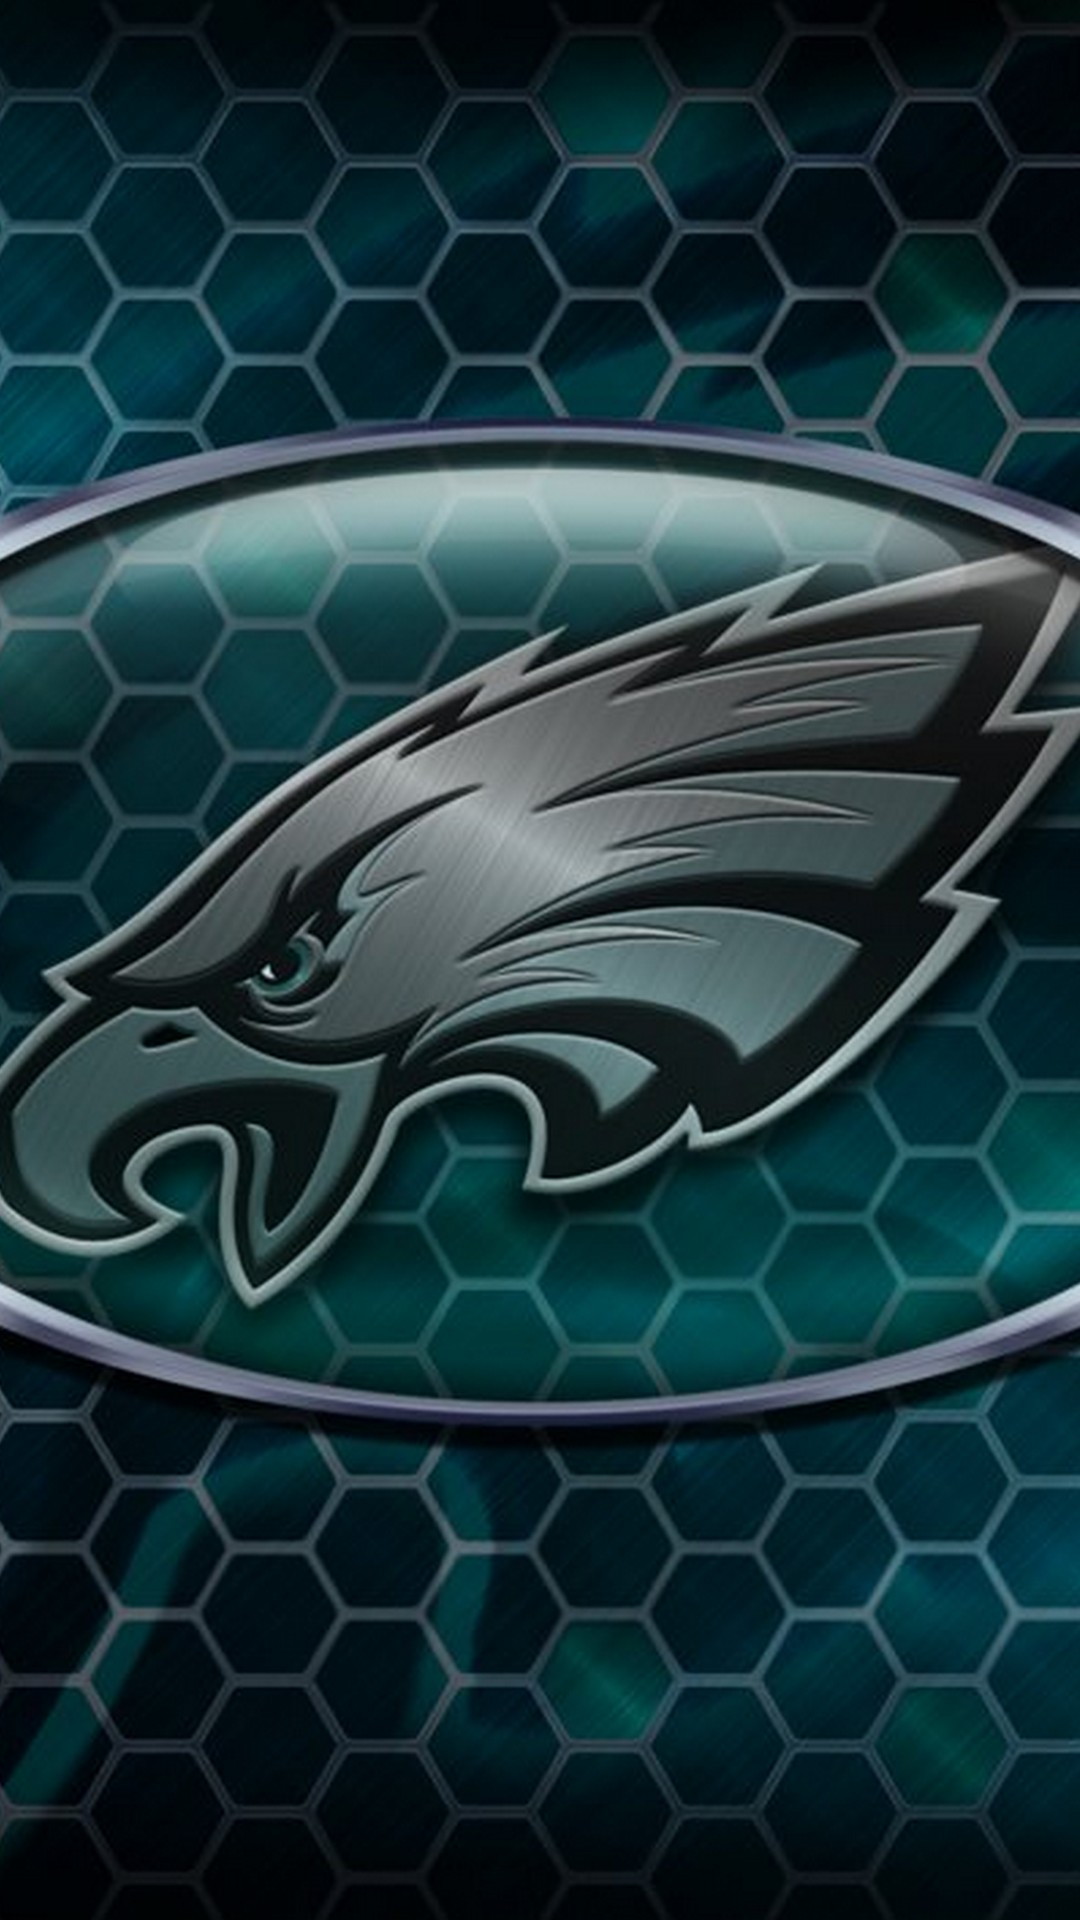 Philadelphia Eagles iPhone Wallpaper New With high-resolution 1080X1920 pixel. Donwload and set as wallpaper for your iPhone X, iPhone XS home screen backgrounds, XS Max, XR, iPhone8 lock screen wallpaper, iPhone 7, 6, SE, and other mobile devices